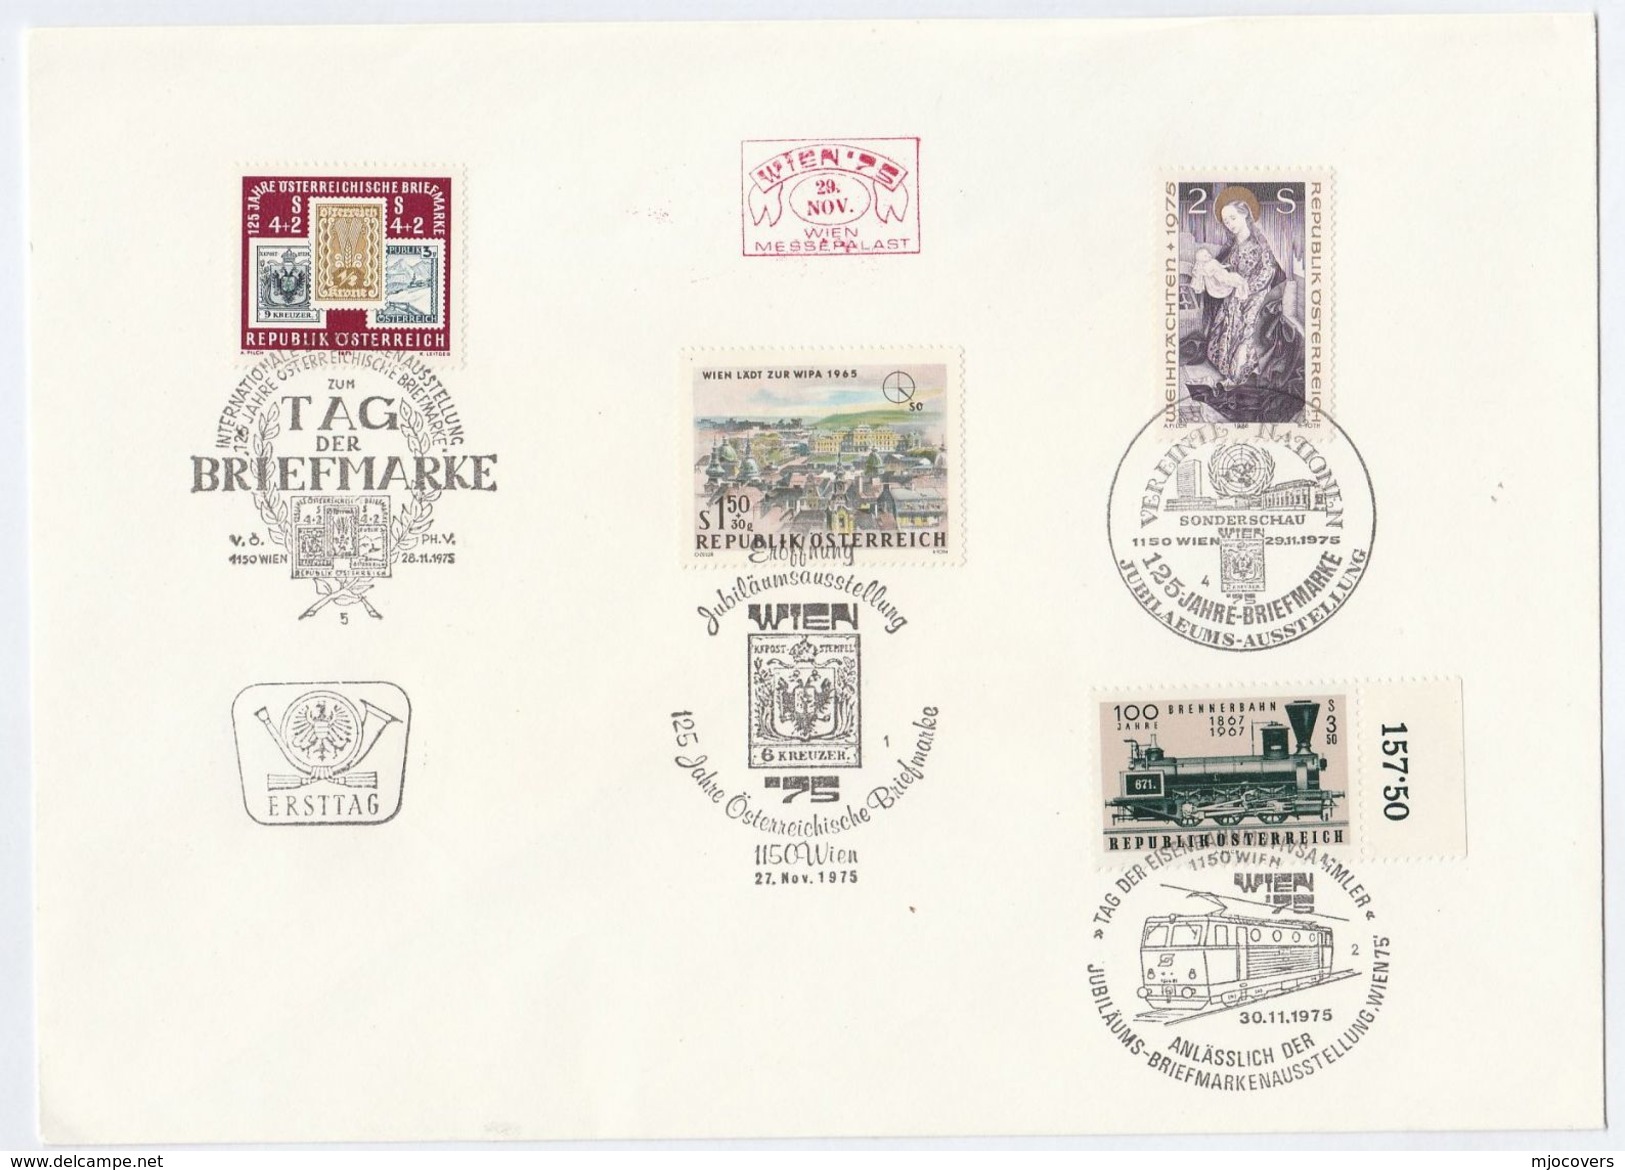 1975 AUSTRIA COVER Pmk RAILWAY TRAIN EVENT, STAMP DAY EVENT, PHILATELIC EXHIBITION, STAMP ON STAMPS, UNITED NATIONS Un - Stamps On Stamps